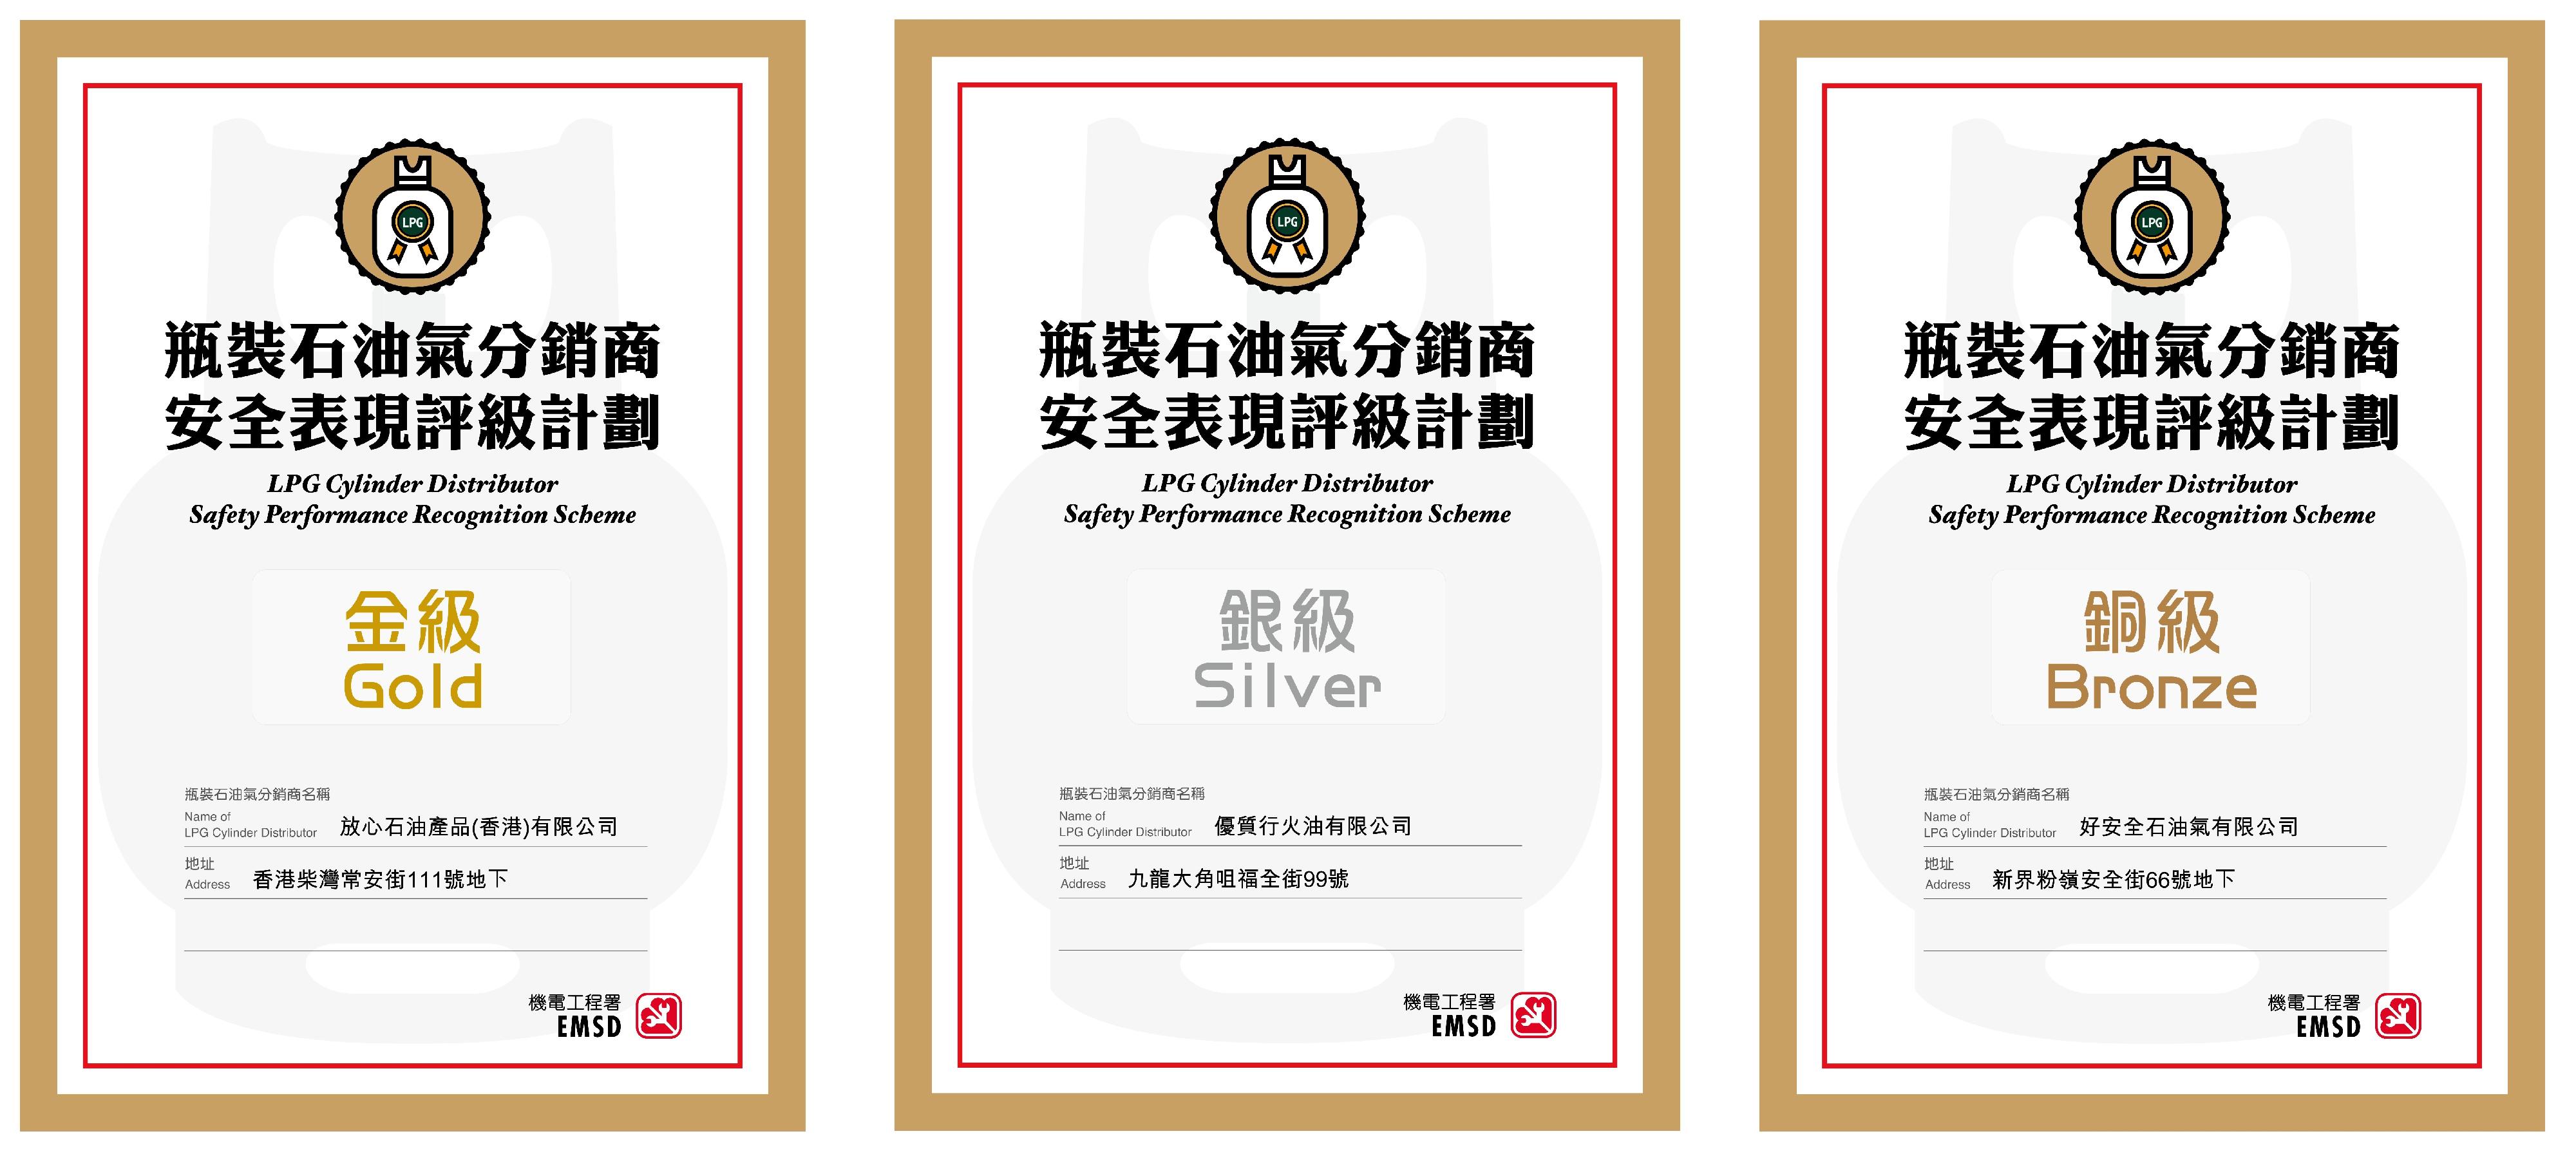 The Electrical and Mechanical Services Department announced today (March 31) the rating results of the Liquefied Petroleum Gas Cylinder Distributor Safety Performance Recognition Scheme for 2022. Picture shows the certificates of the gold, silver and bronze ratings under the Scheme. 